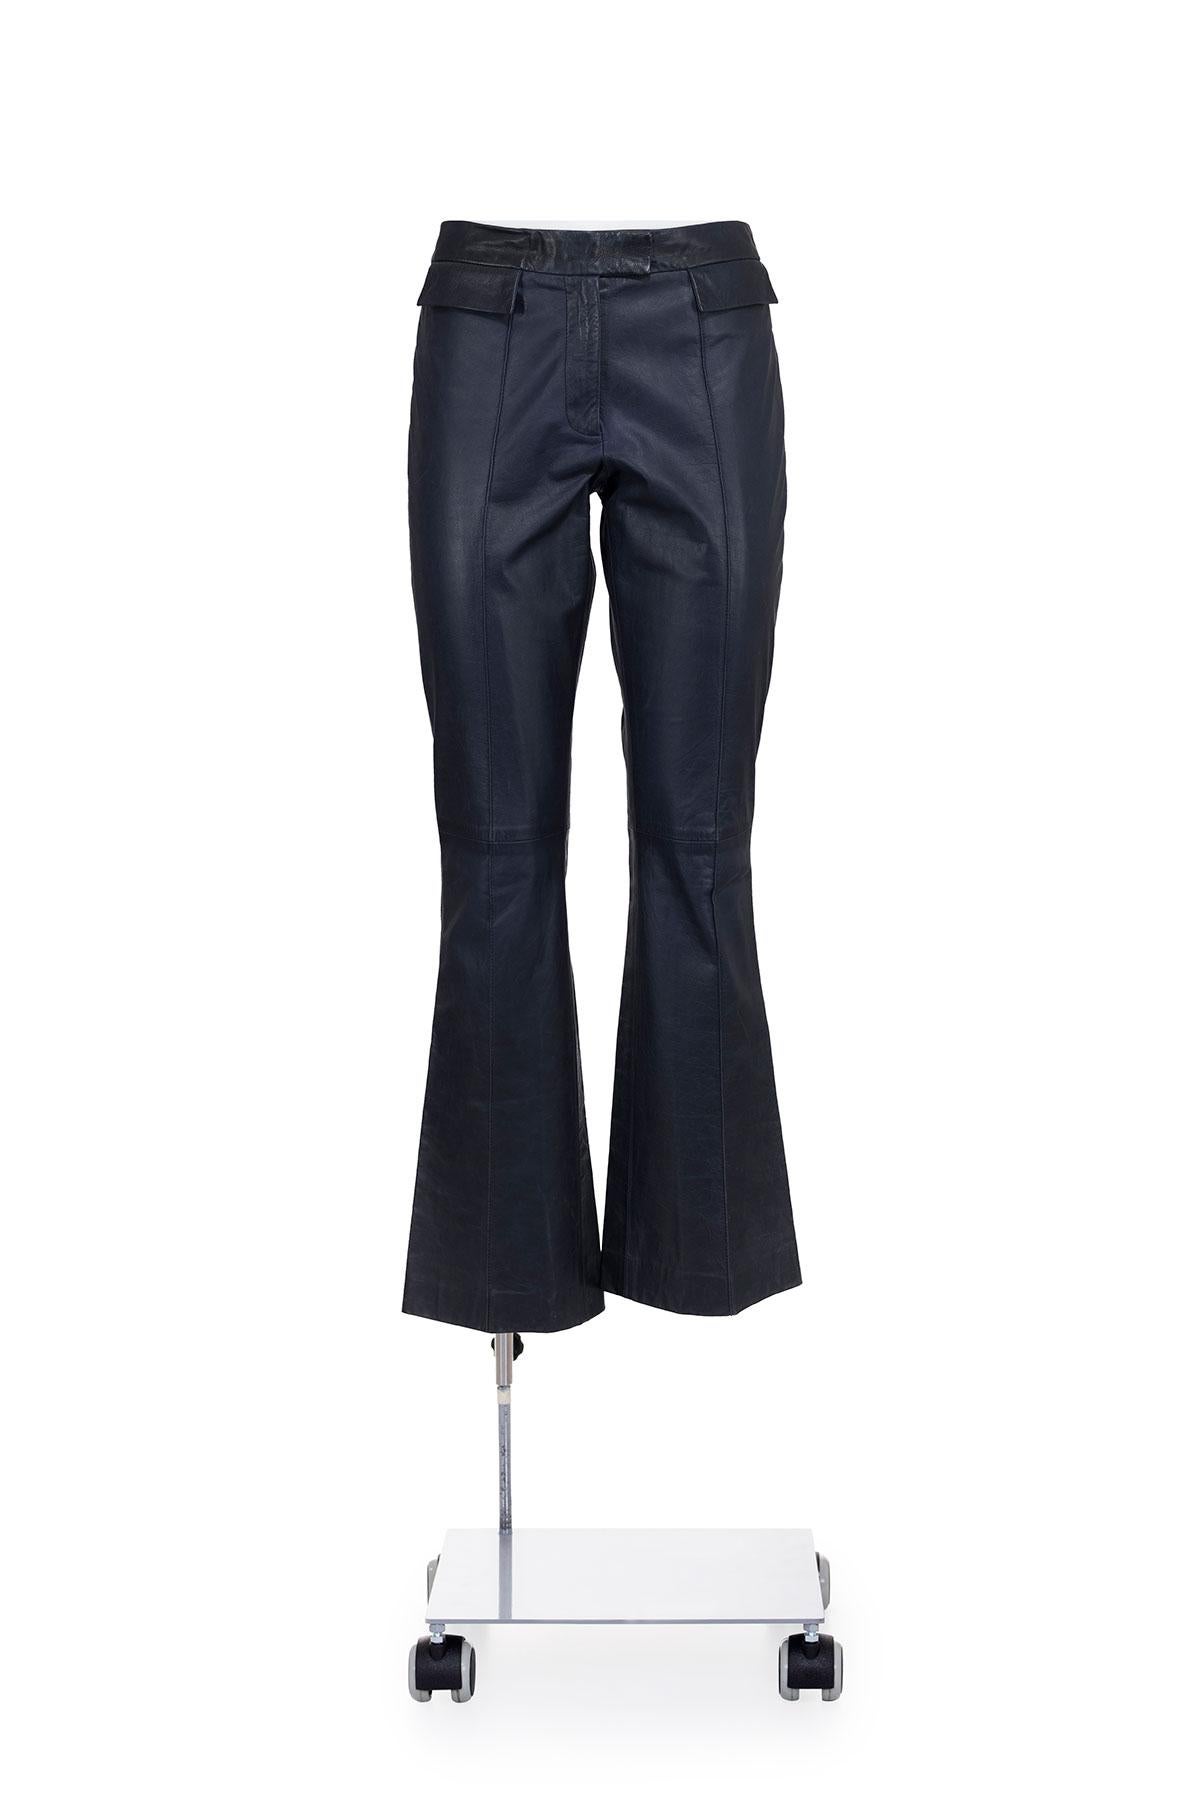 Spring Summer 1991 iconic leather flared trousers by John Galliano.
Small flap pockets at the front.
Zip and hook closure at the front.
Fully lined.
The composition tag is missing, seems to be made of leather. 